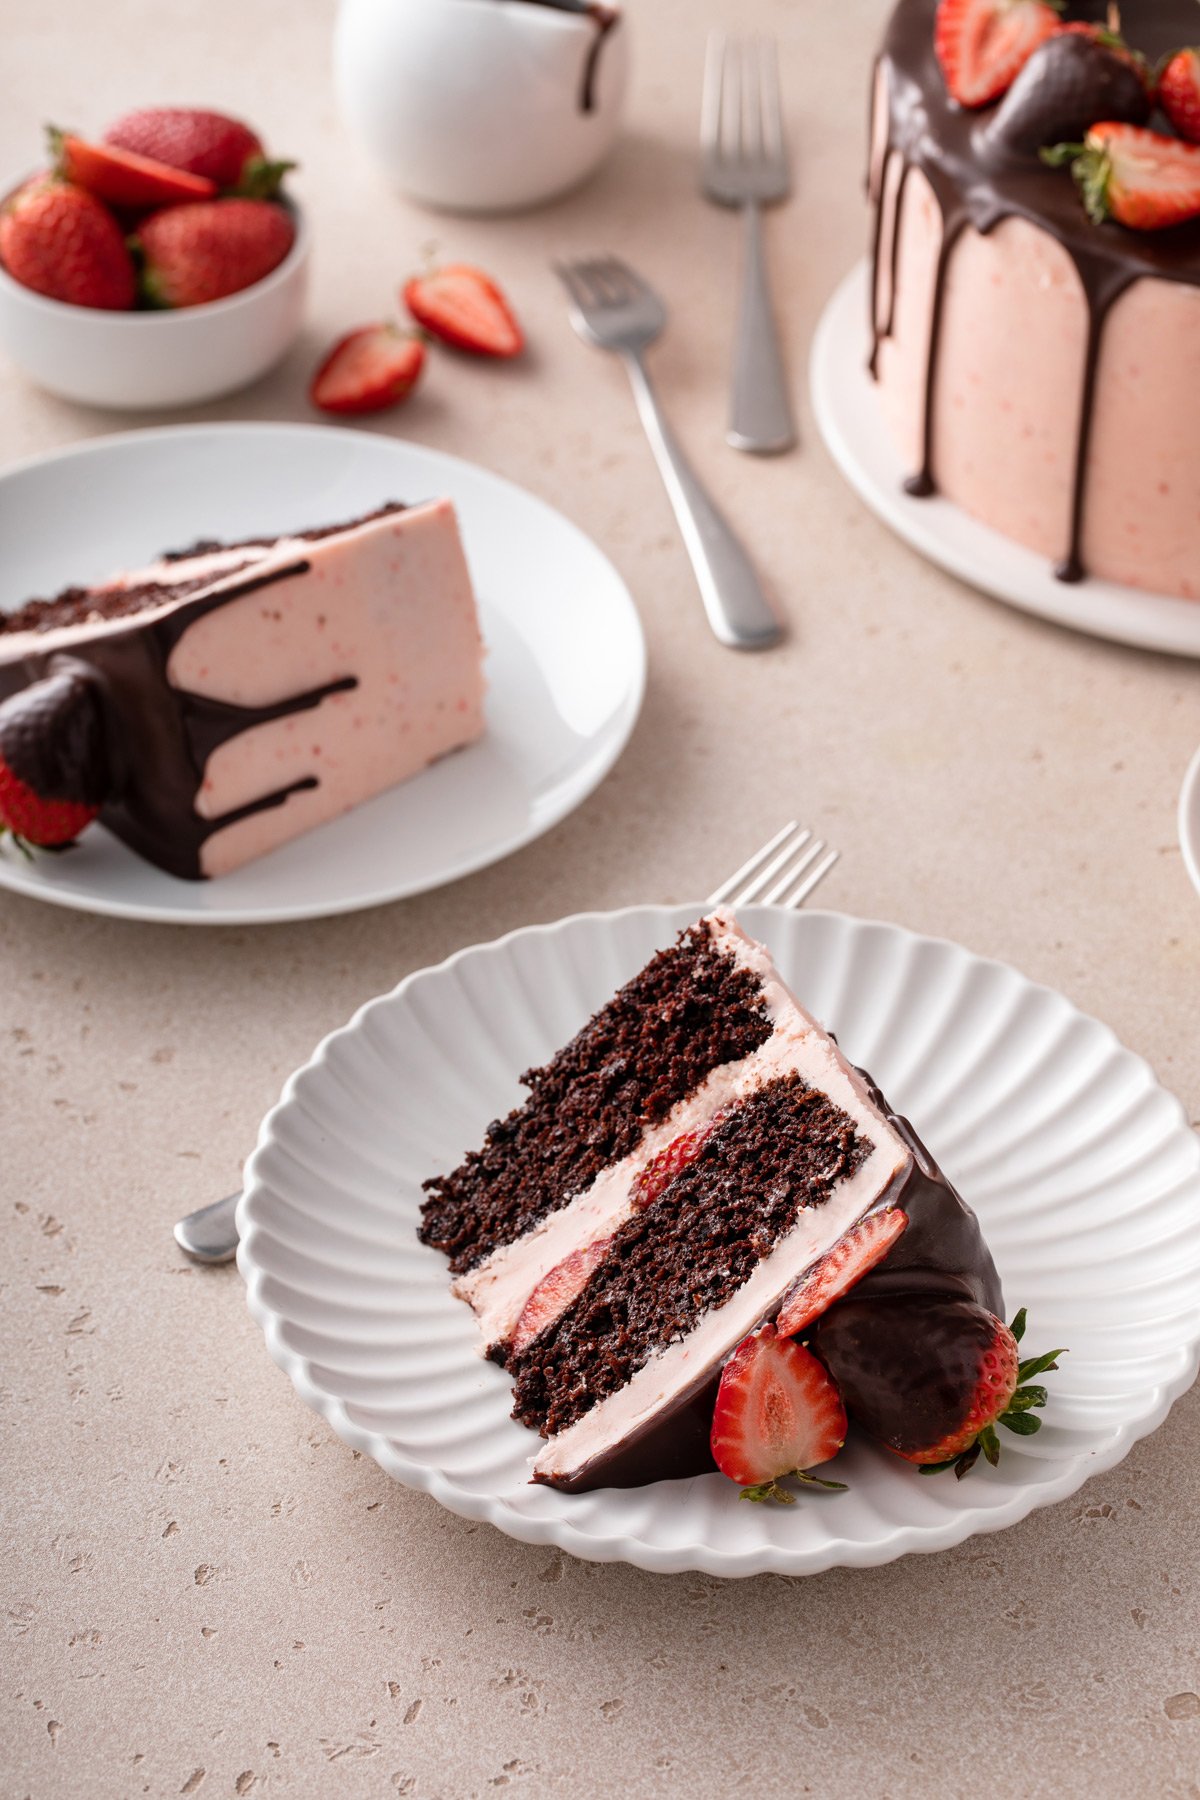 Two white plates, each holding a slice of chocolate strawberry cake, with the rest of the cake visible in the background.